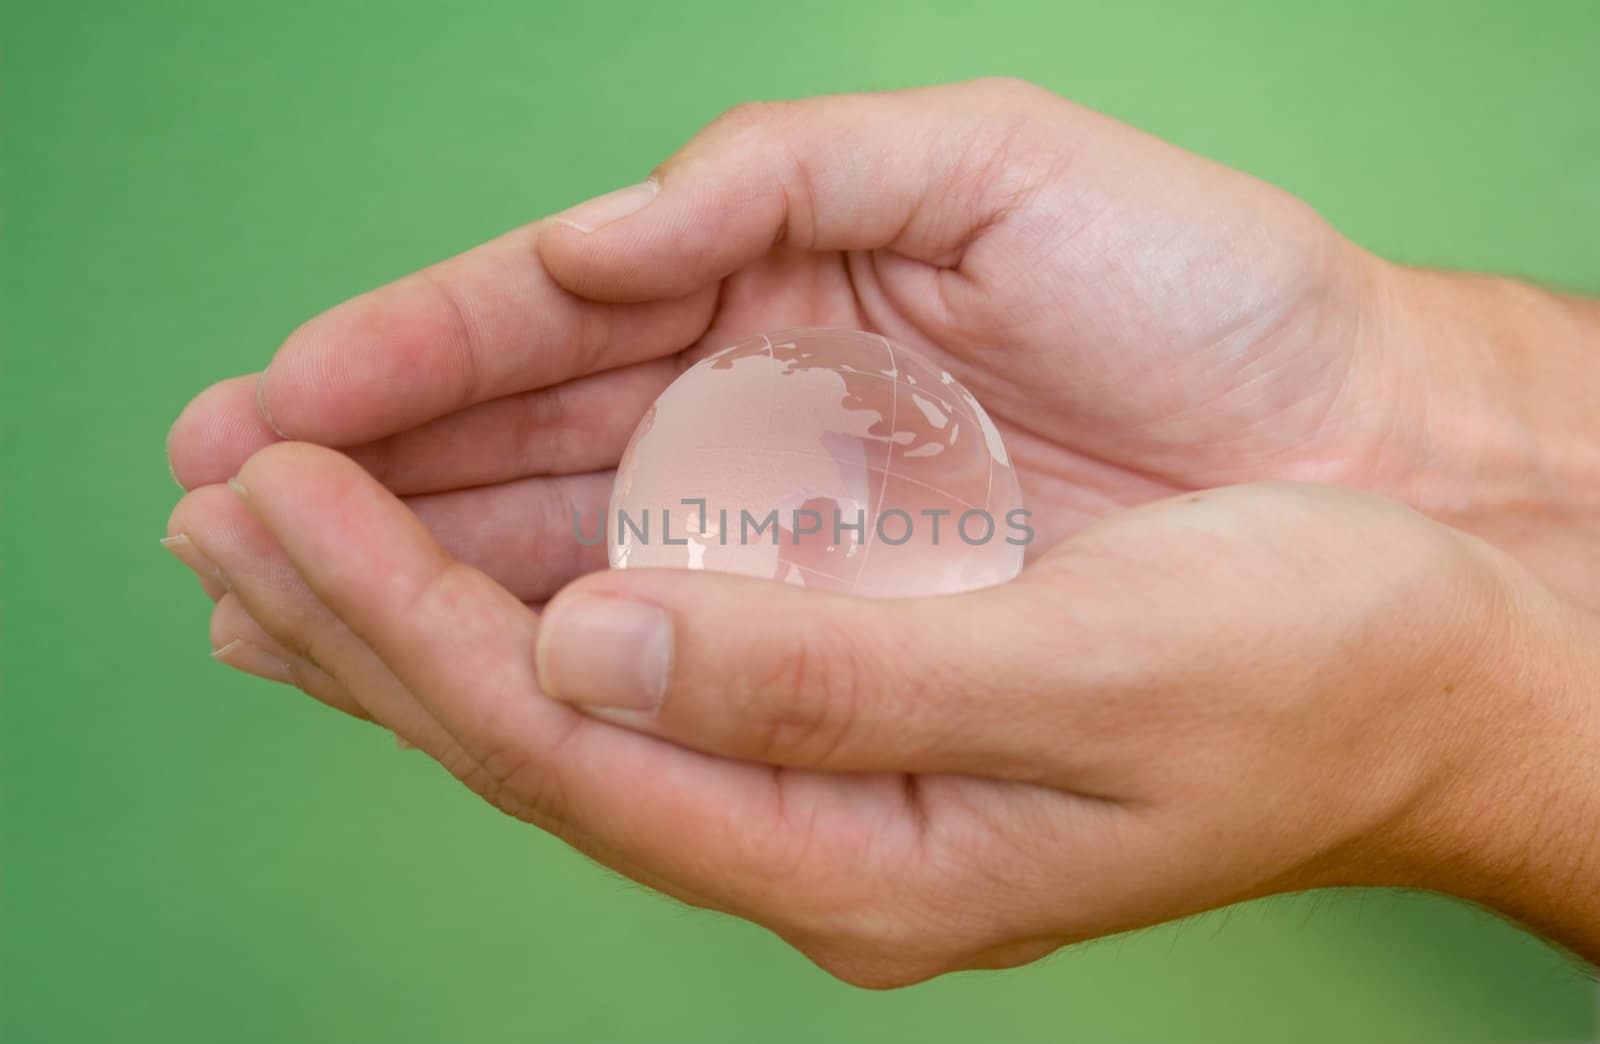 Hands cradling the world shot against a green background